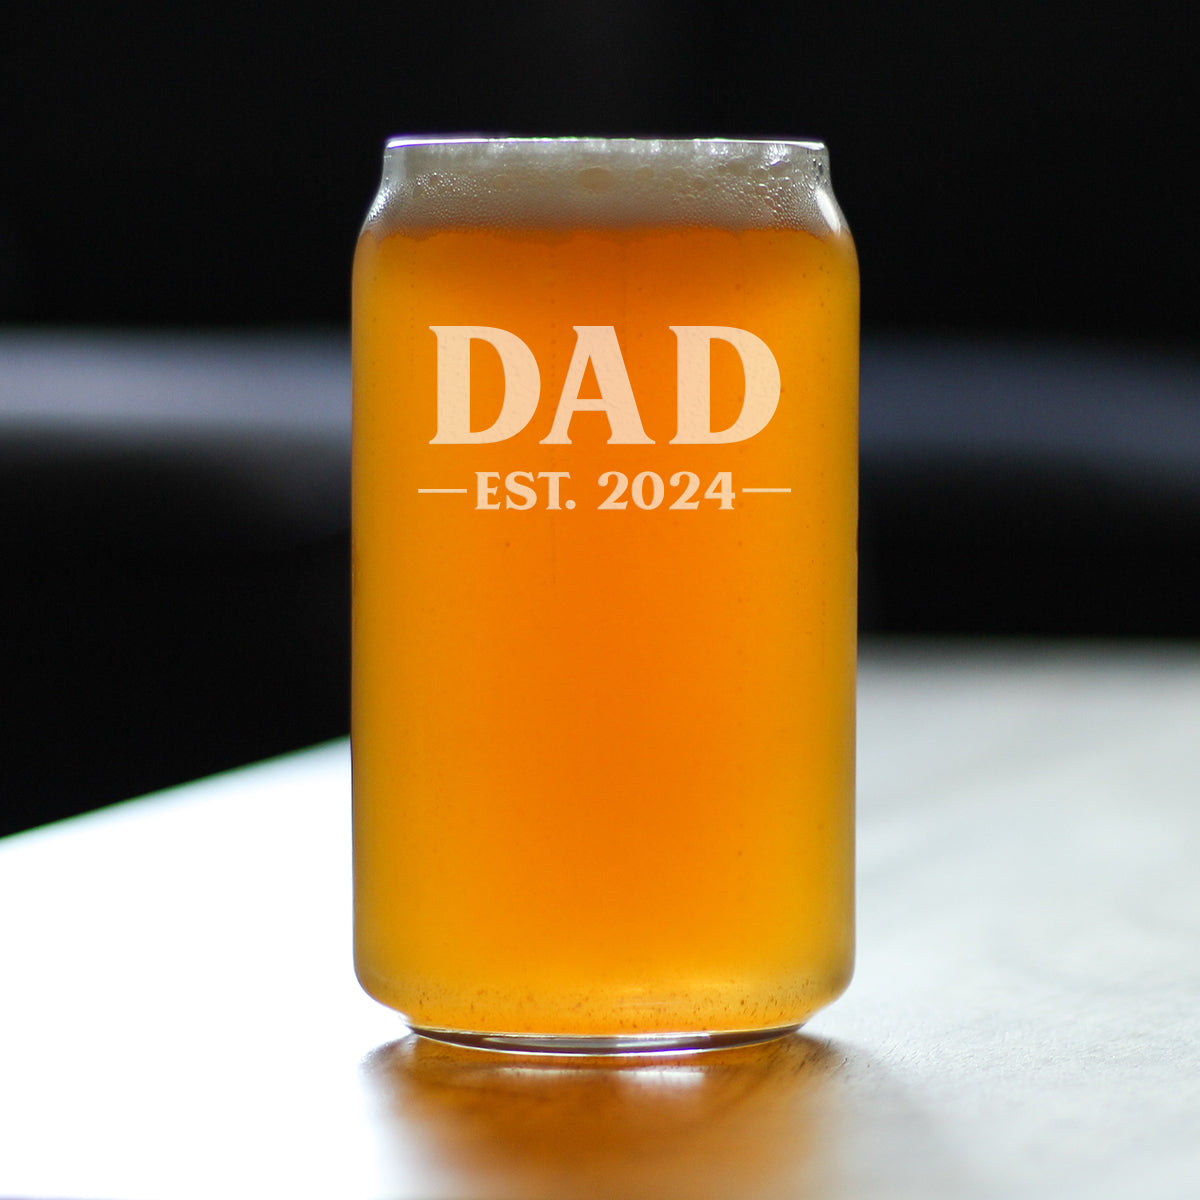 Dad Est 2024 - New Father Beer Can Pint Glass Gift for First Time Parents - Bold 16 Oz Glasses